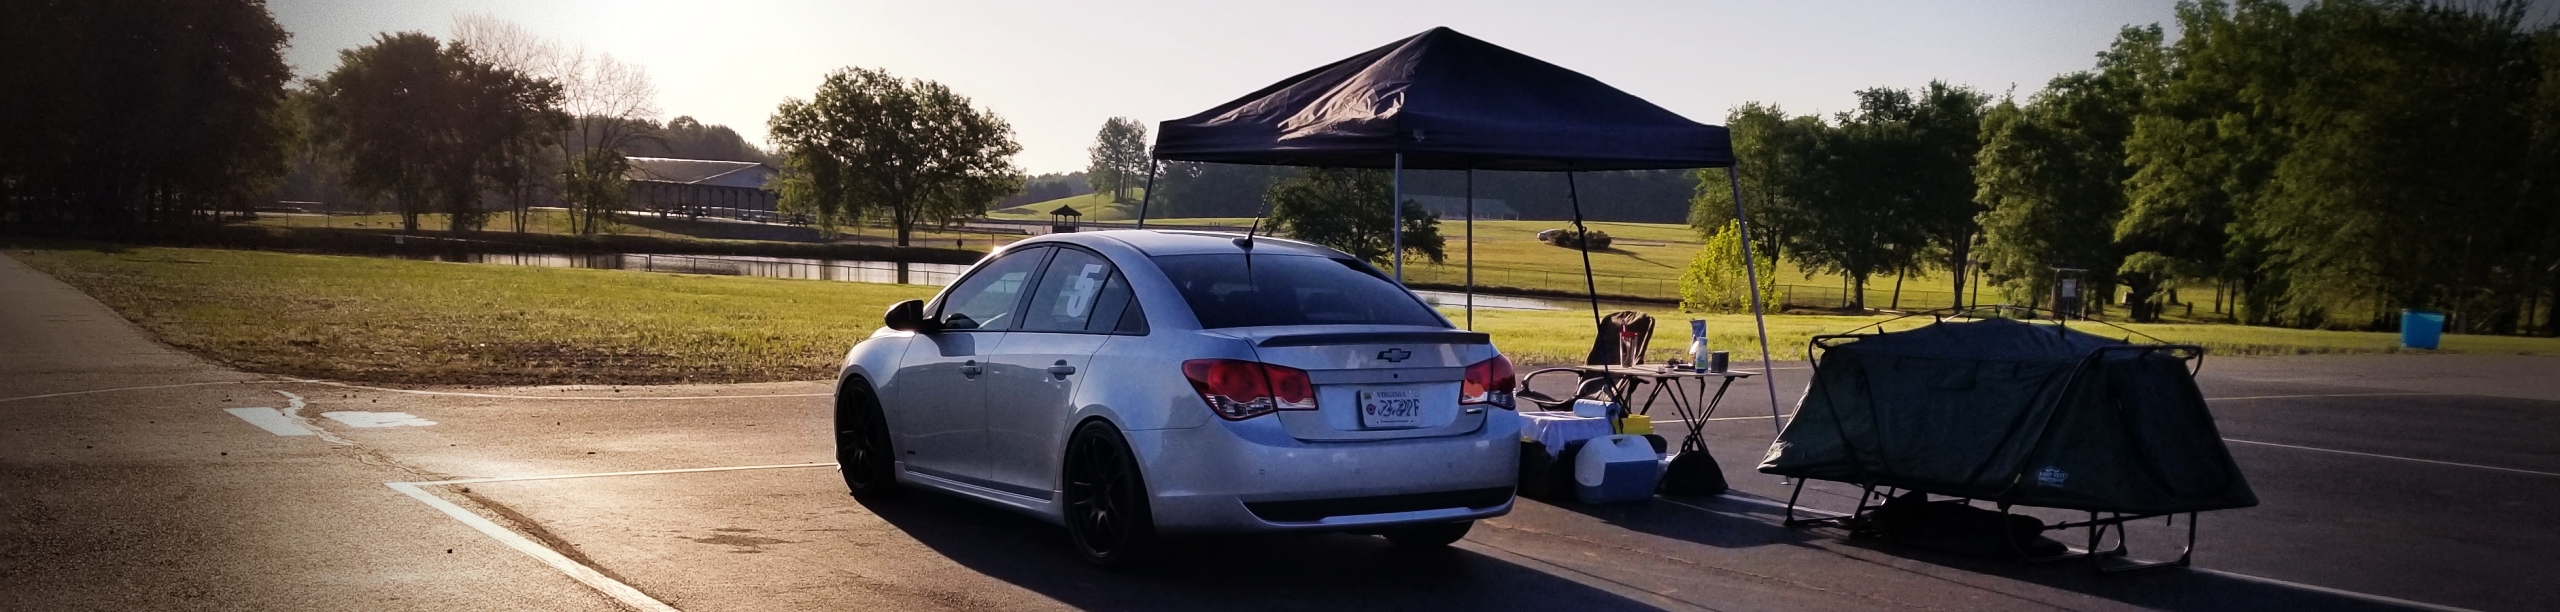 FIRST TRACK DAY ATTEMPT FOR THE CRUZE